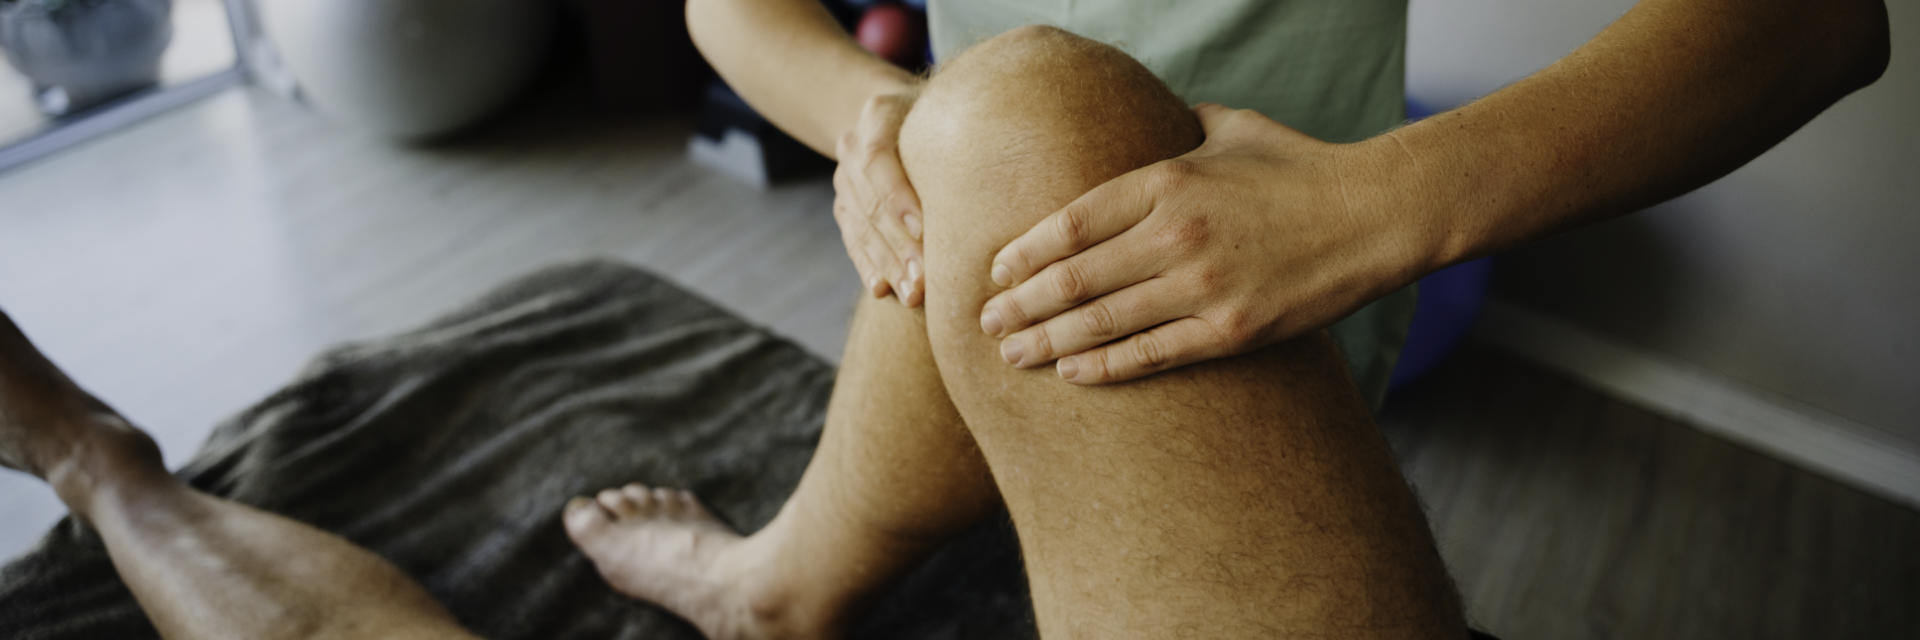 An orthopedic specialist examining patient's knee.